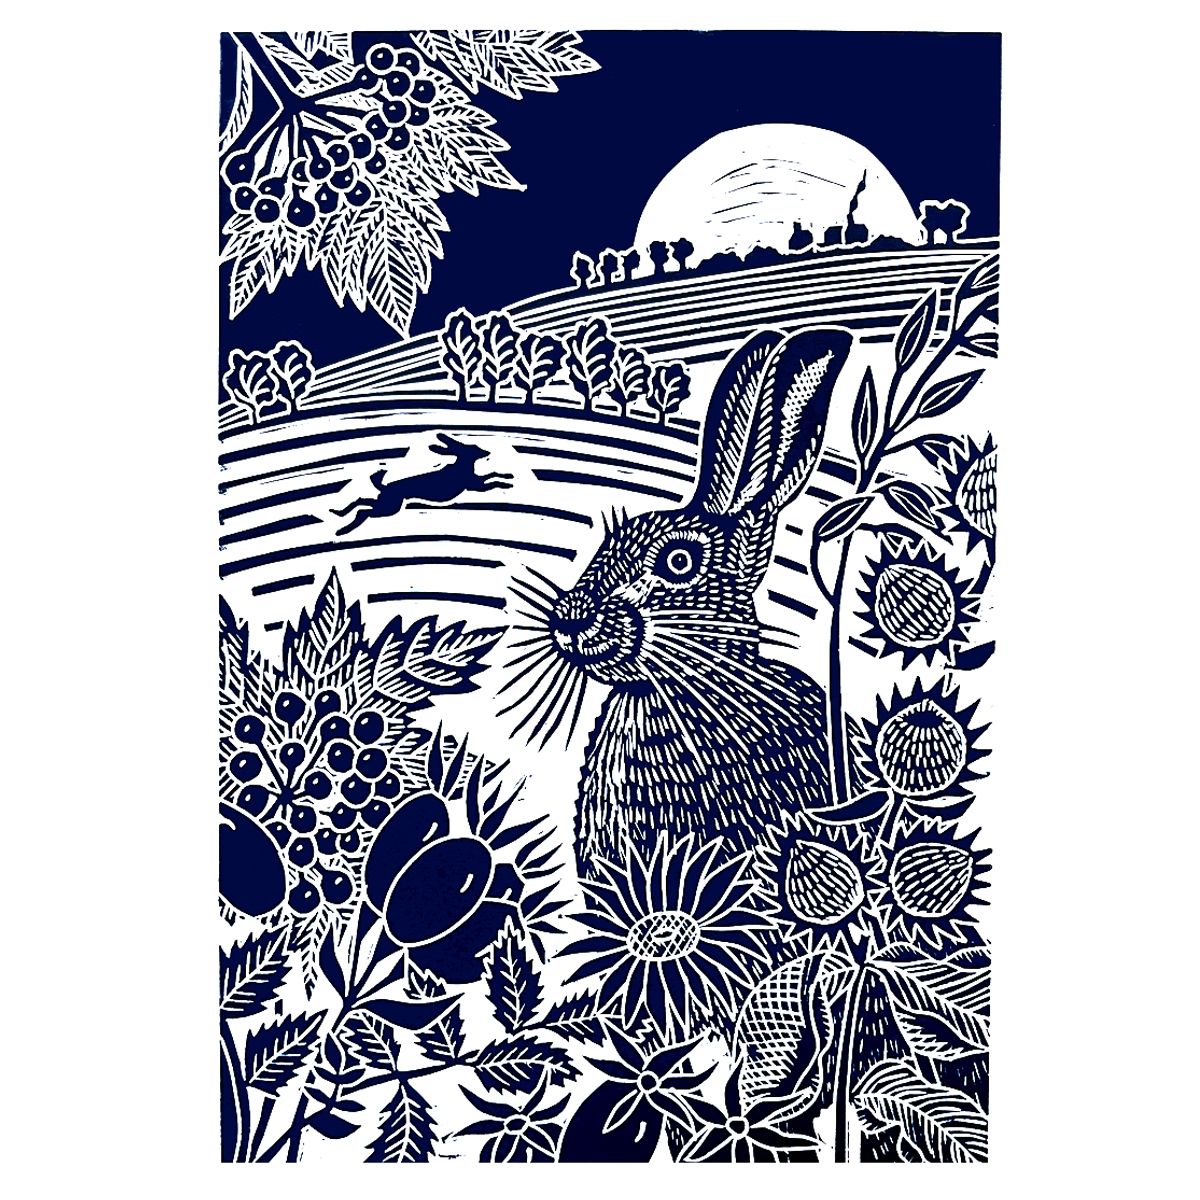 Harvest Moon Hares by Kate Heiss